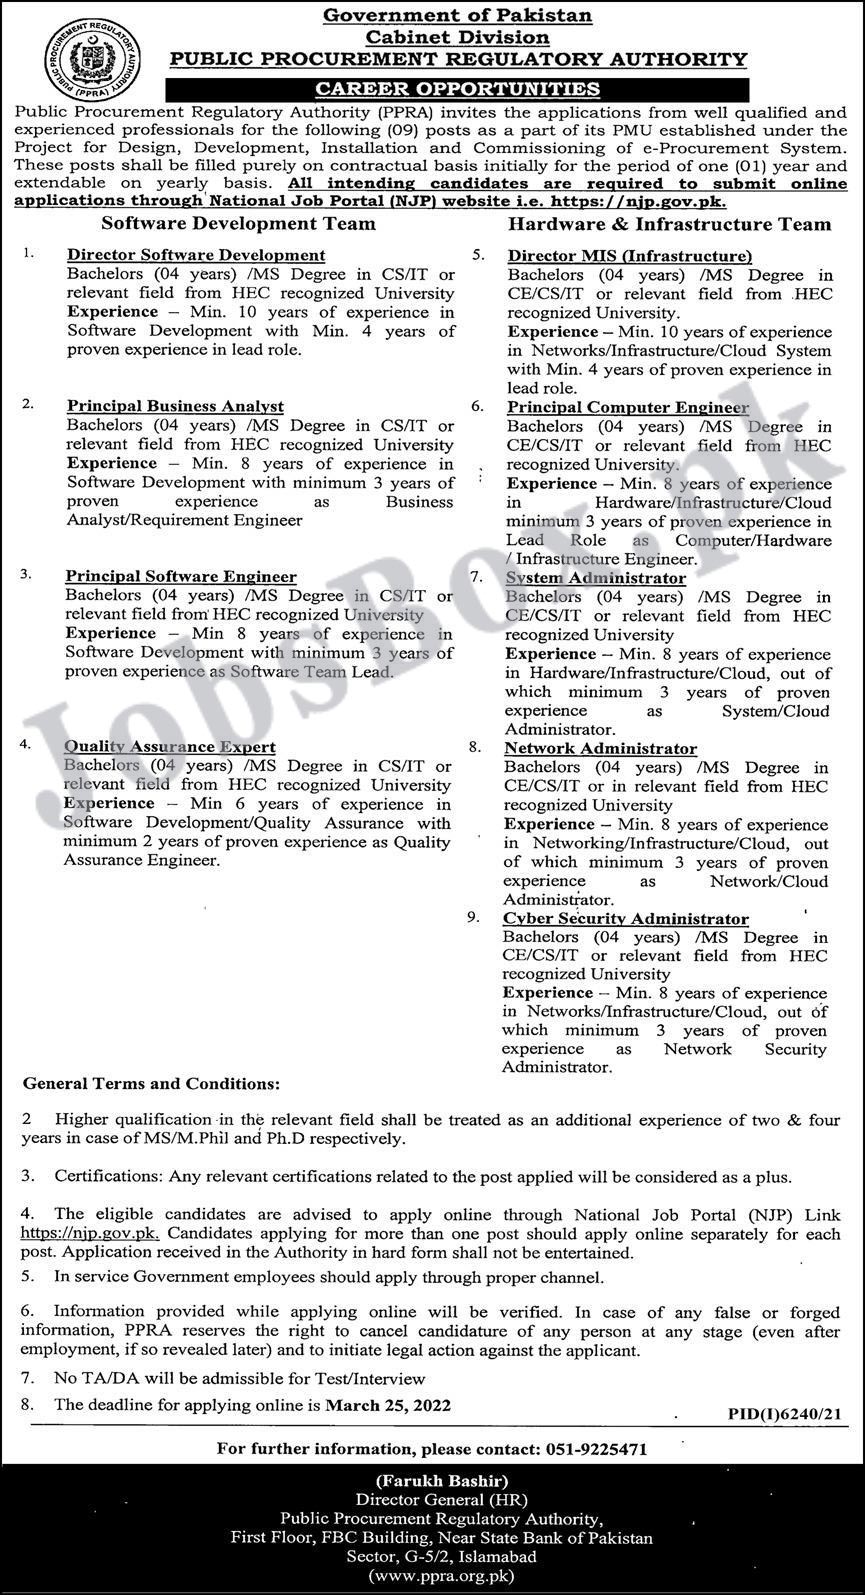 PPRA Jobs 2022 Cabinet Division Government of Pakistan